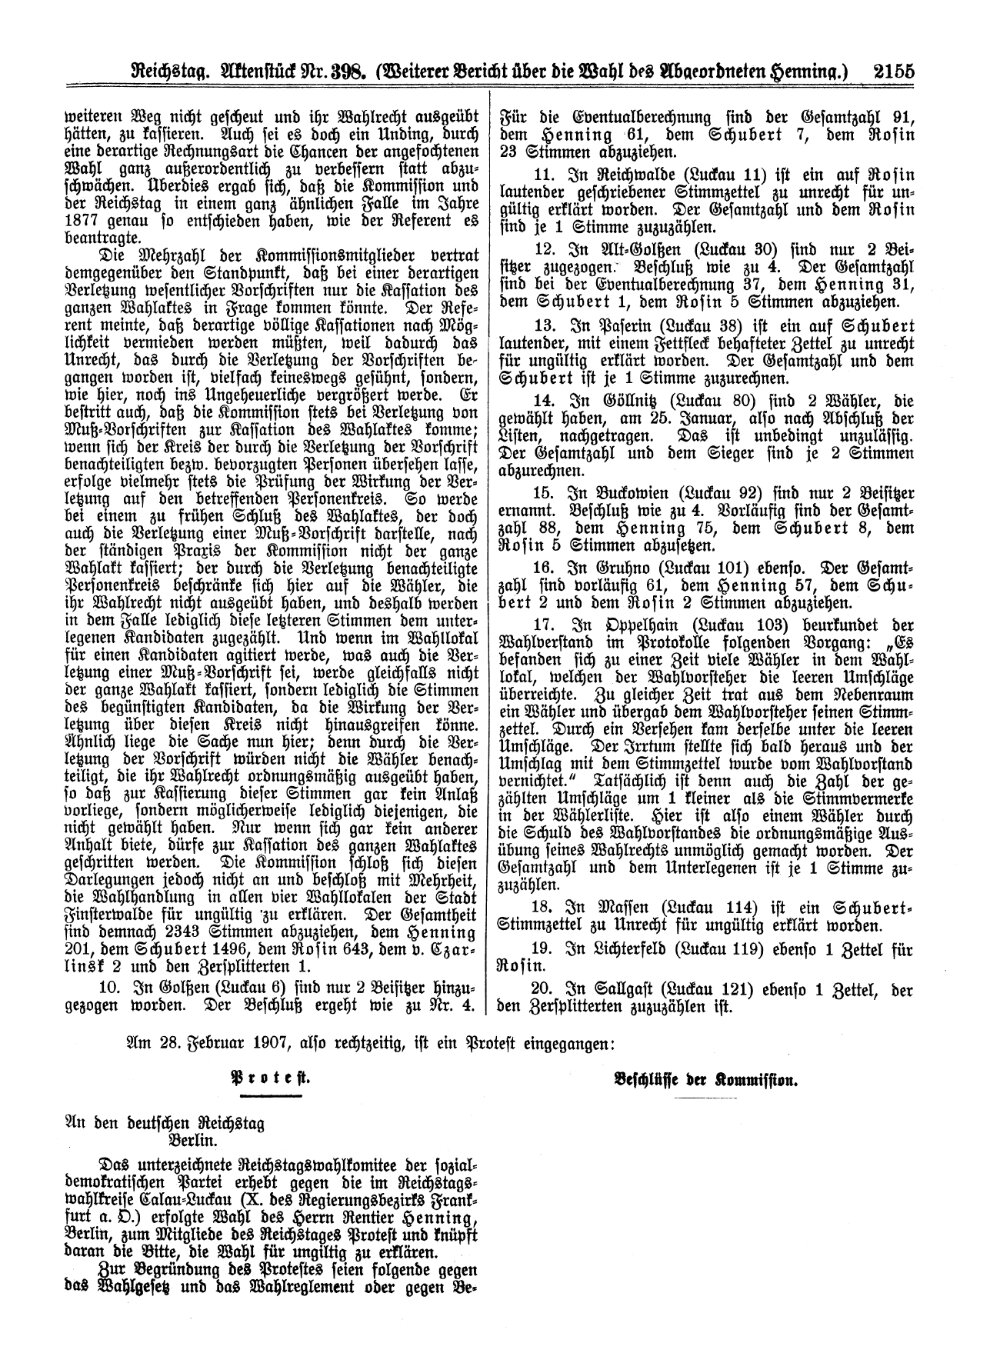 Scan of page 2155